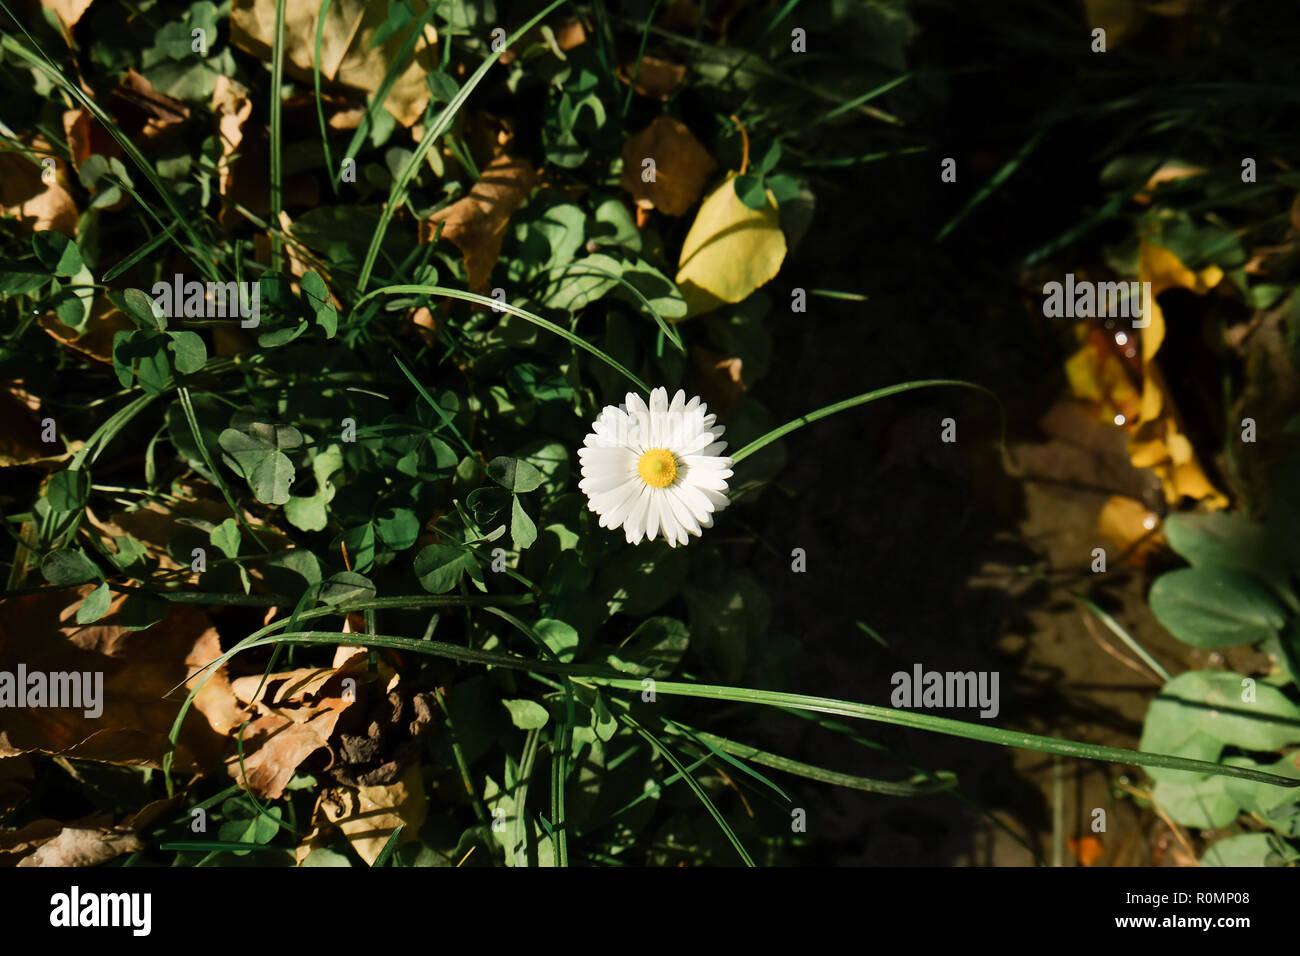 A small white flower with yellow pollen blooms in the yard. Stock Photo